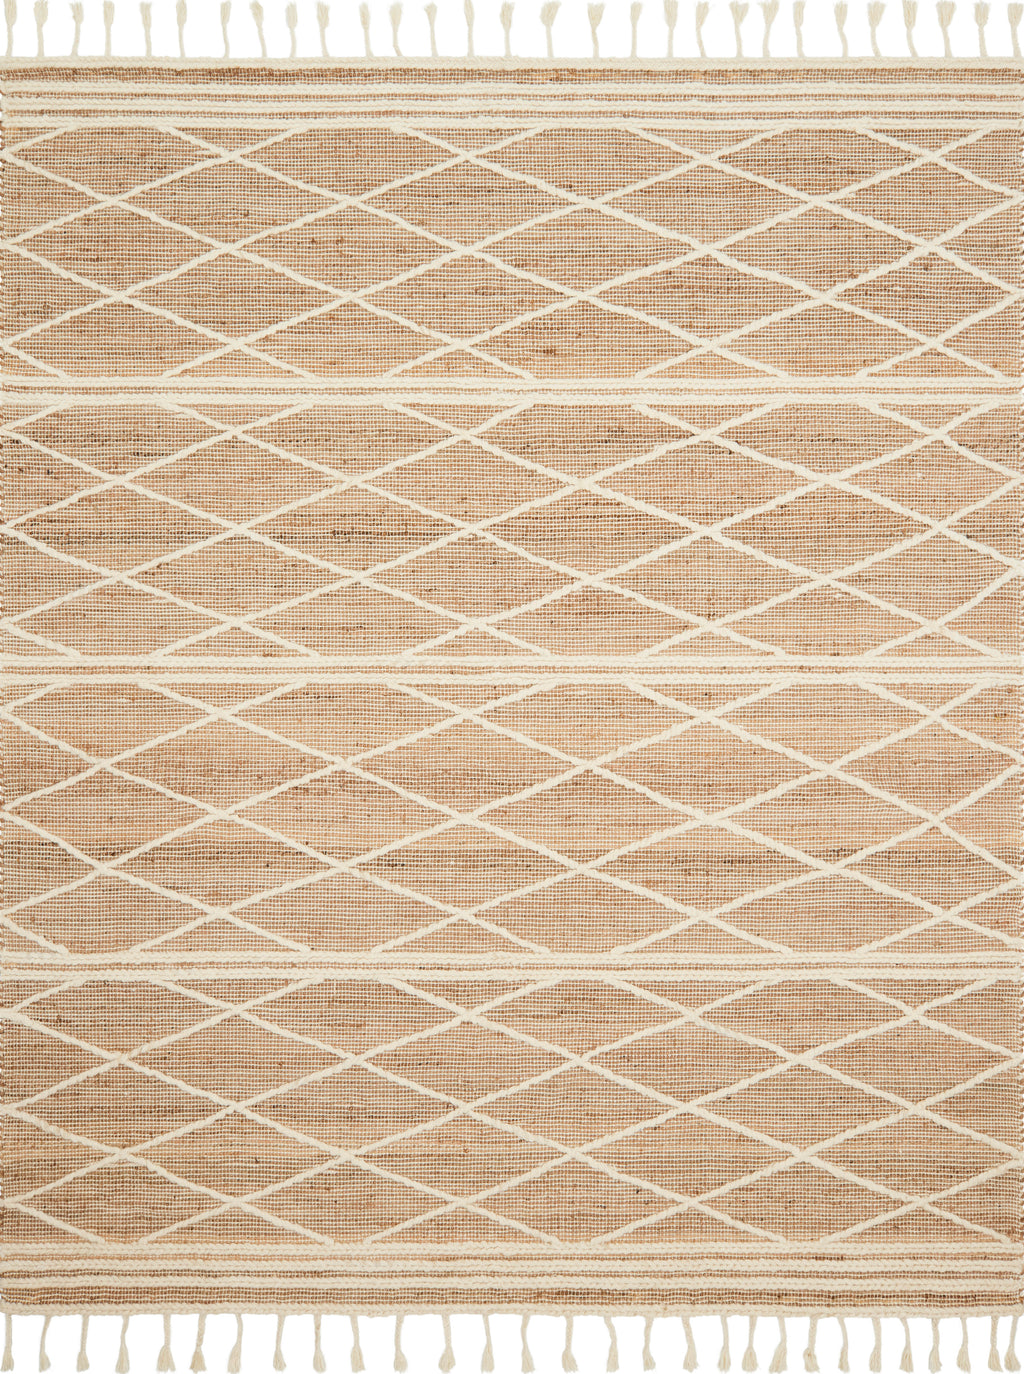 CORA Collection Rug  in  BLUSH / WHITE Red Accent Hand-Woven Viscose/Acrylic